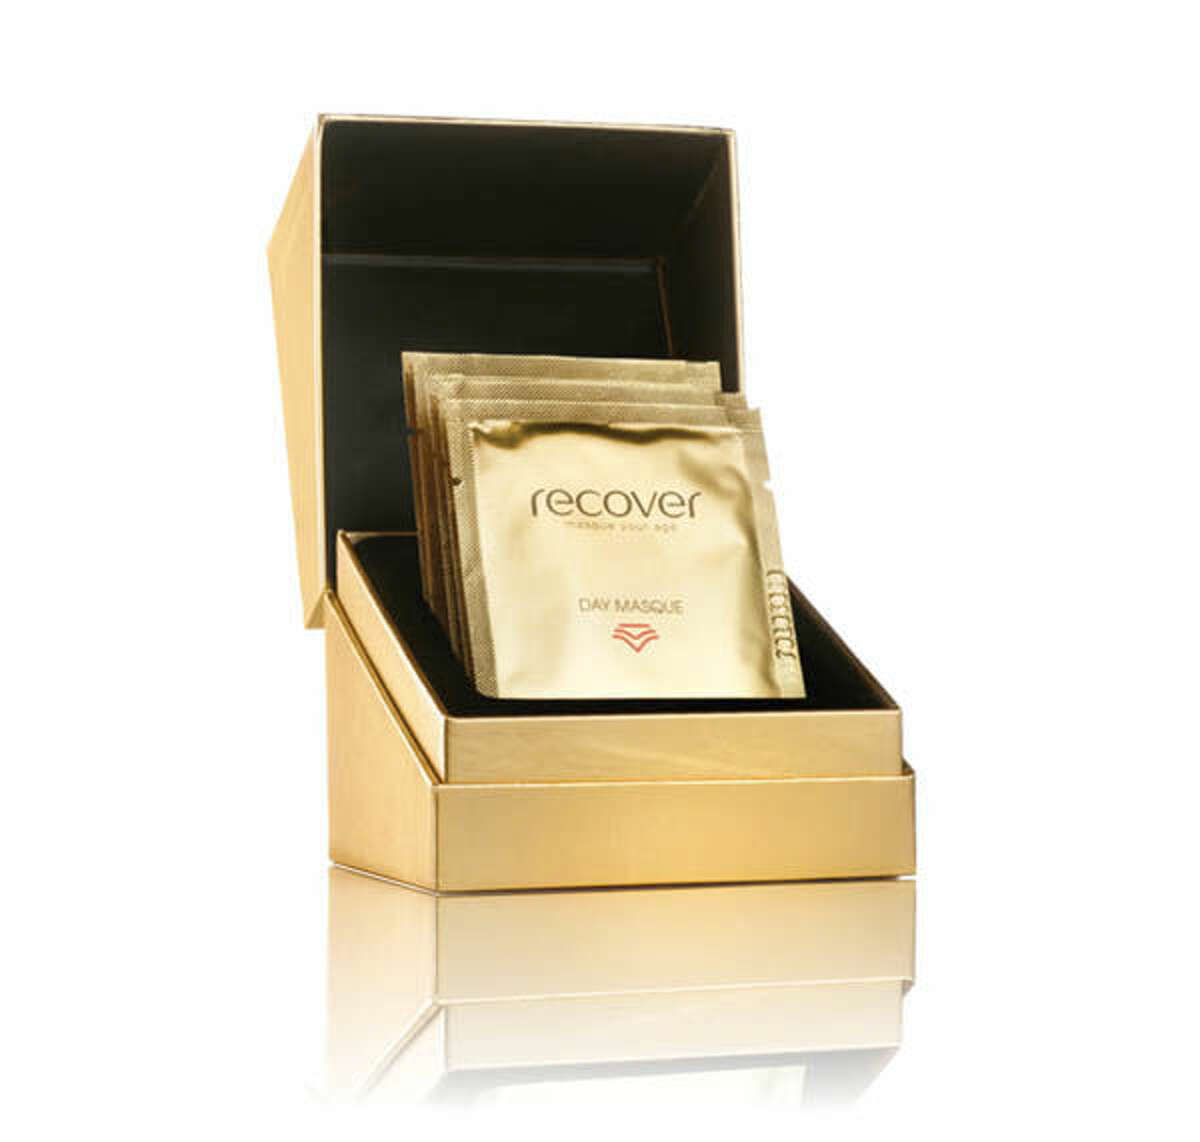 SEACRET Recover Day Masque 8-pack, also known as Botox in a box, diminishes the appearance of fine lines and wrinkles with results in 15 minutes. $122.99 (VIP customer price) from Naomi Martinez Studio, Hartford, 860-232-8900, SalonNaomi.com.